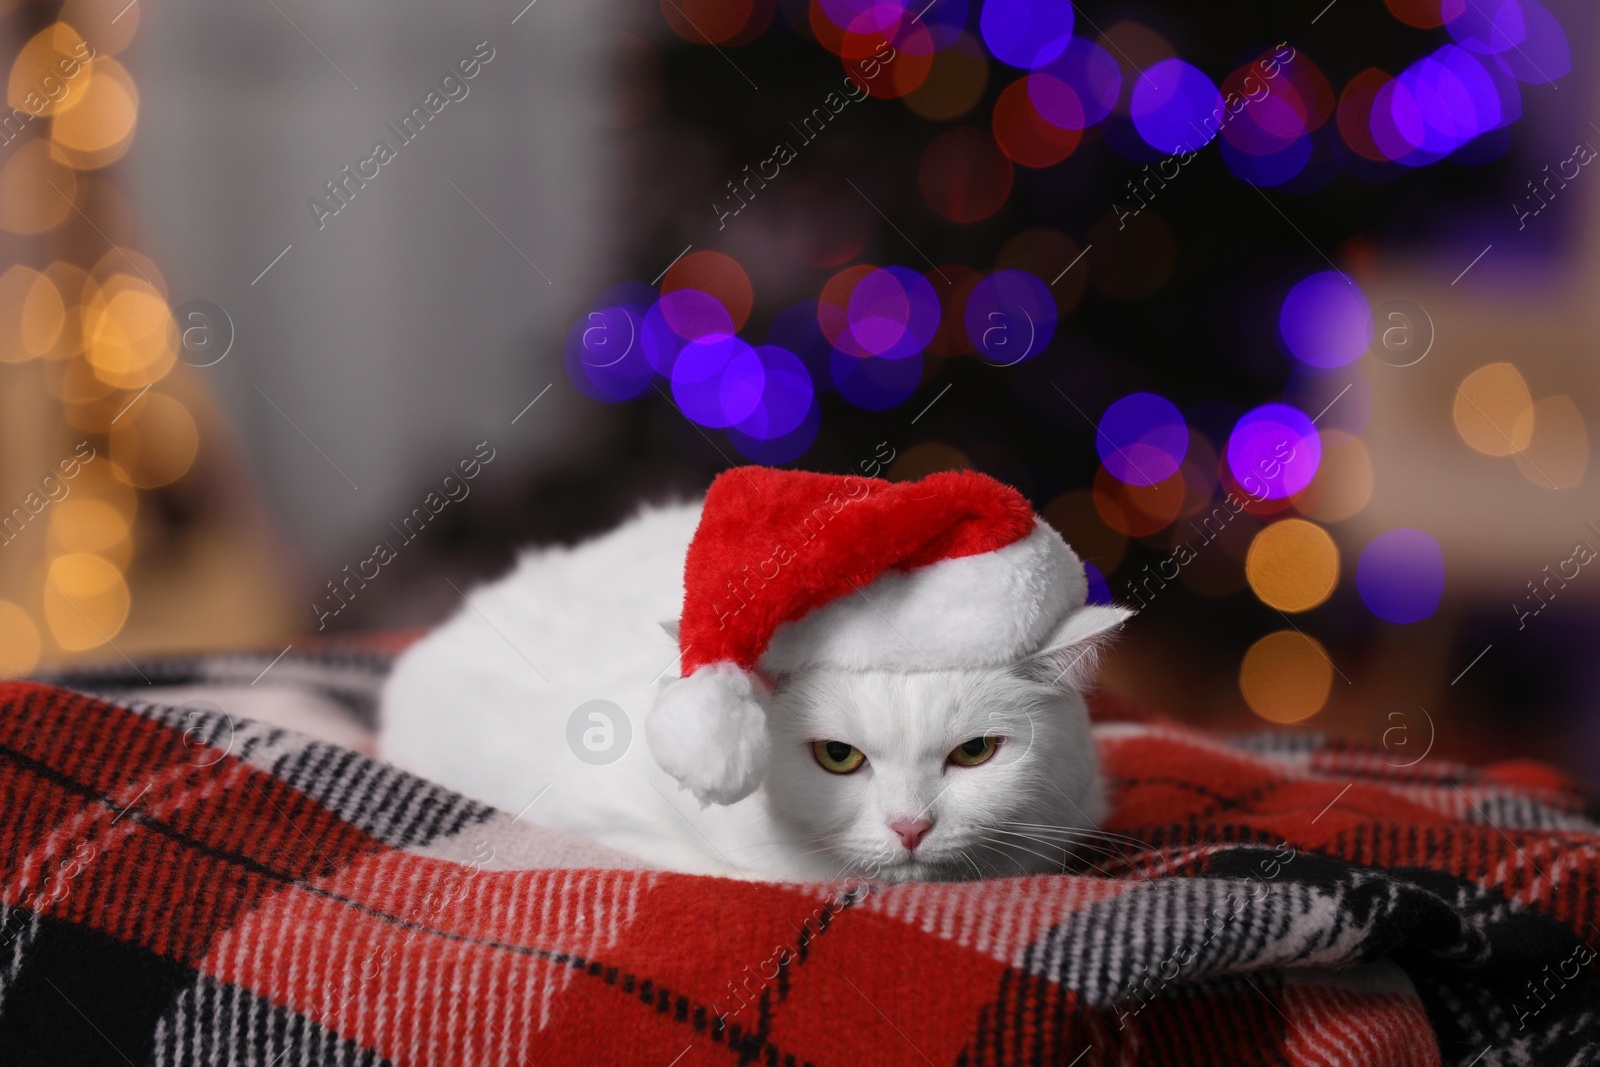 Photo of Adorable cat wearing Christmas hat on blanket against blurred lights